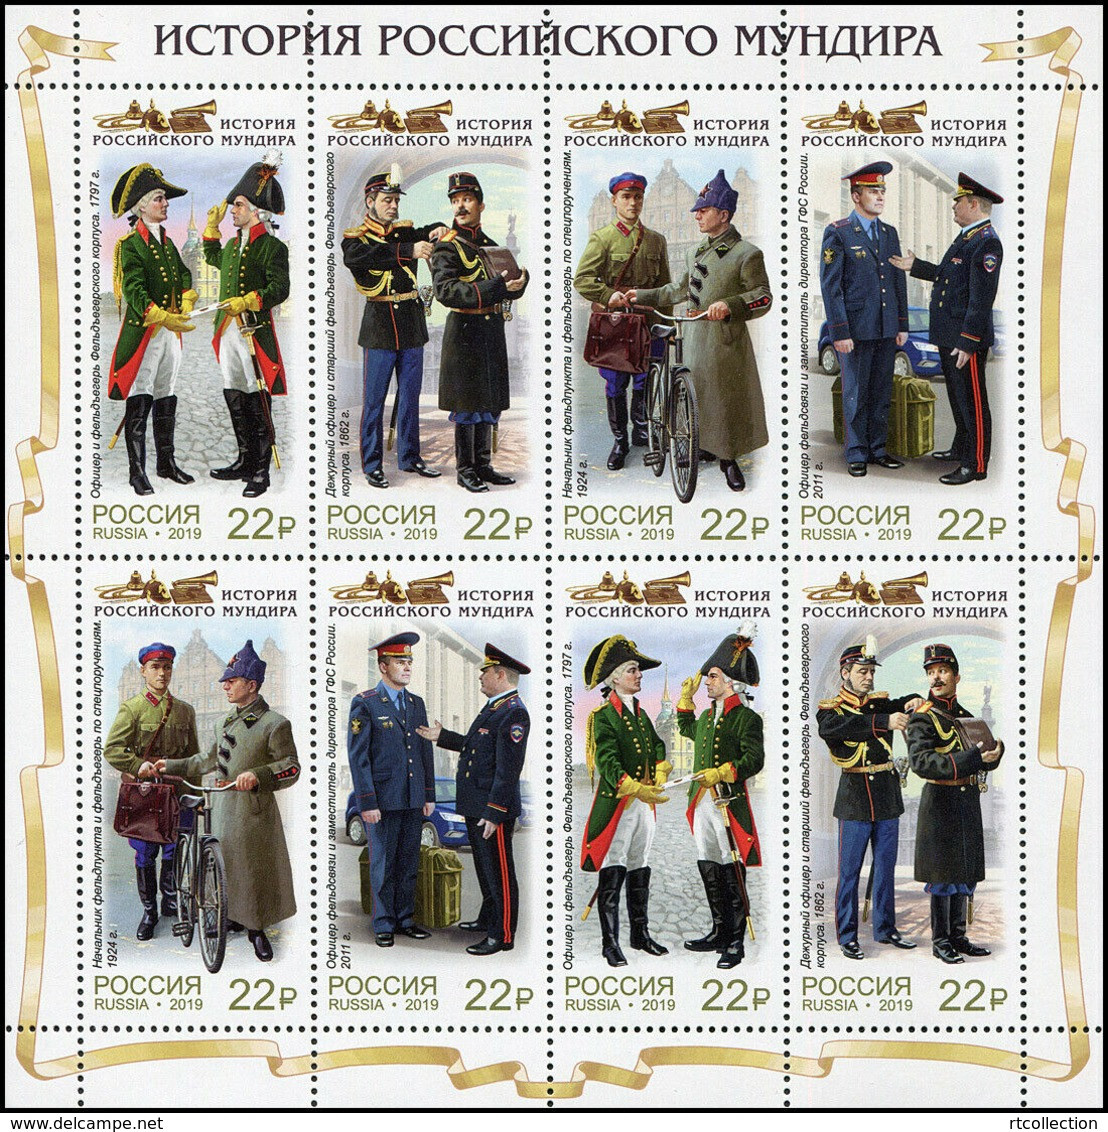 Russia 2019 M/S History Russian Uniform Jacket Diplomatic Customs Service Cloth Cultures Bycycle Military Stamps MNH - Feuilles Complètes